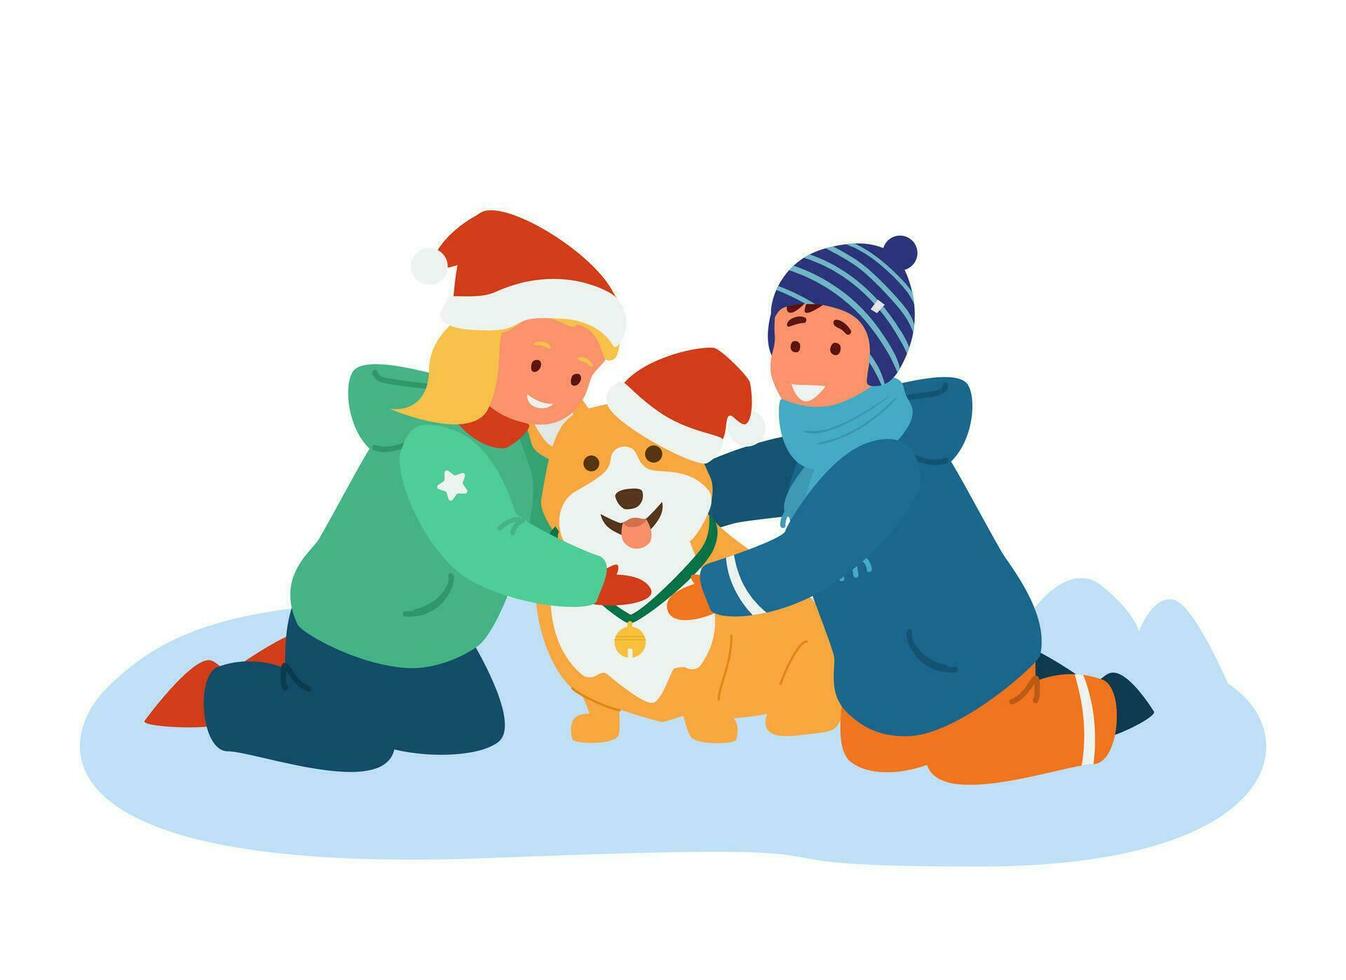 Boy And Girl In Winter Clothes Hugging Corgi In Santa Hat With Bell Outdoors. Flat Vector Illustration. Isolated On White.